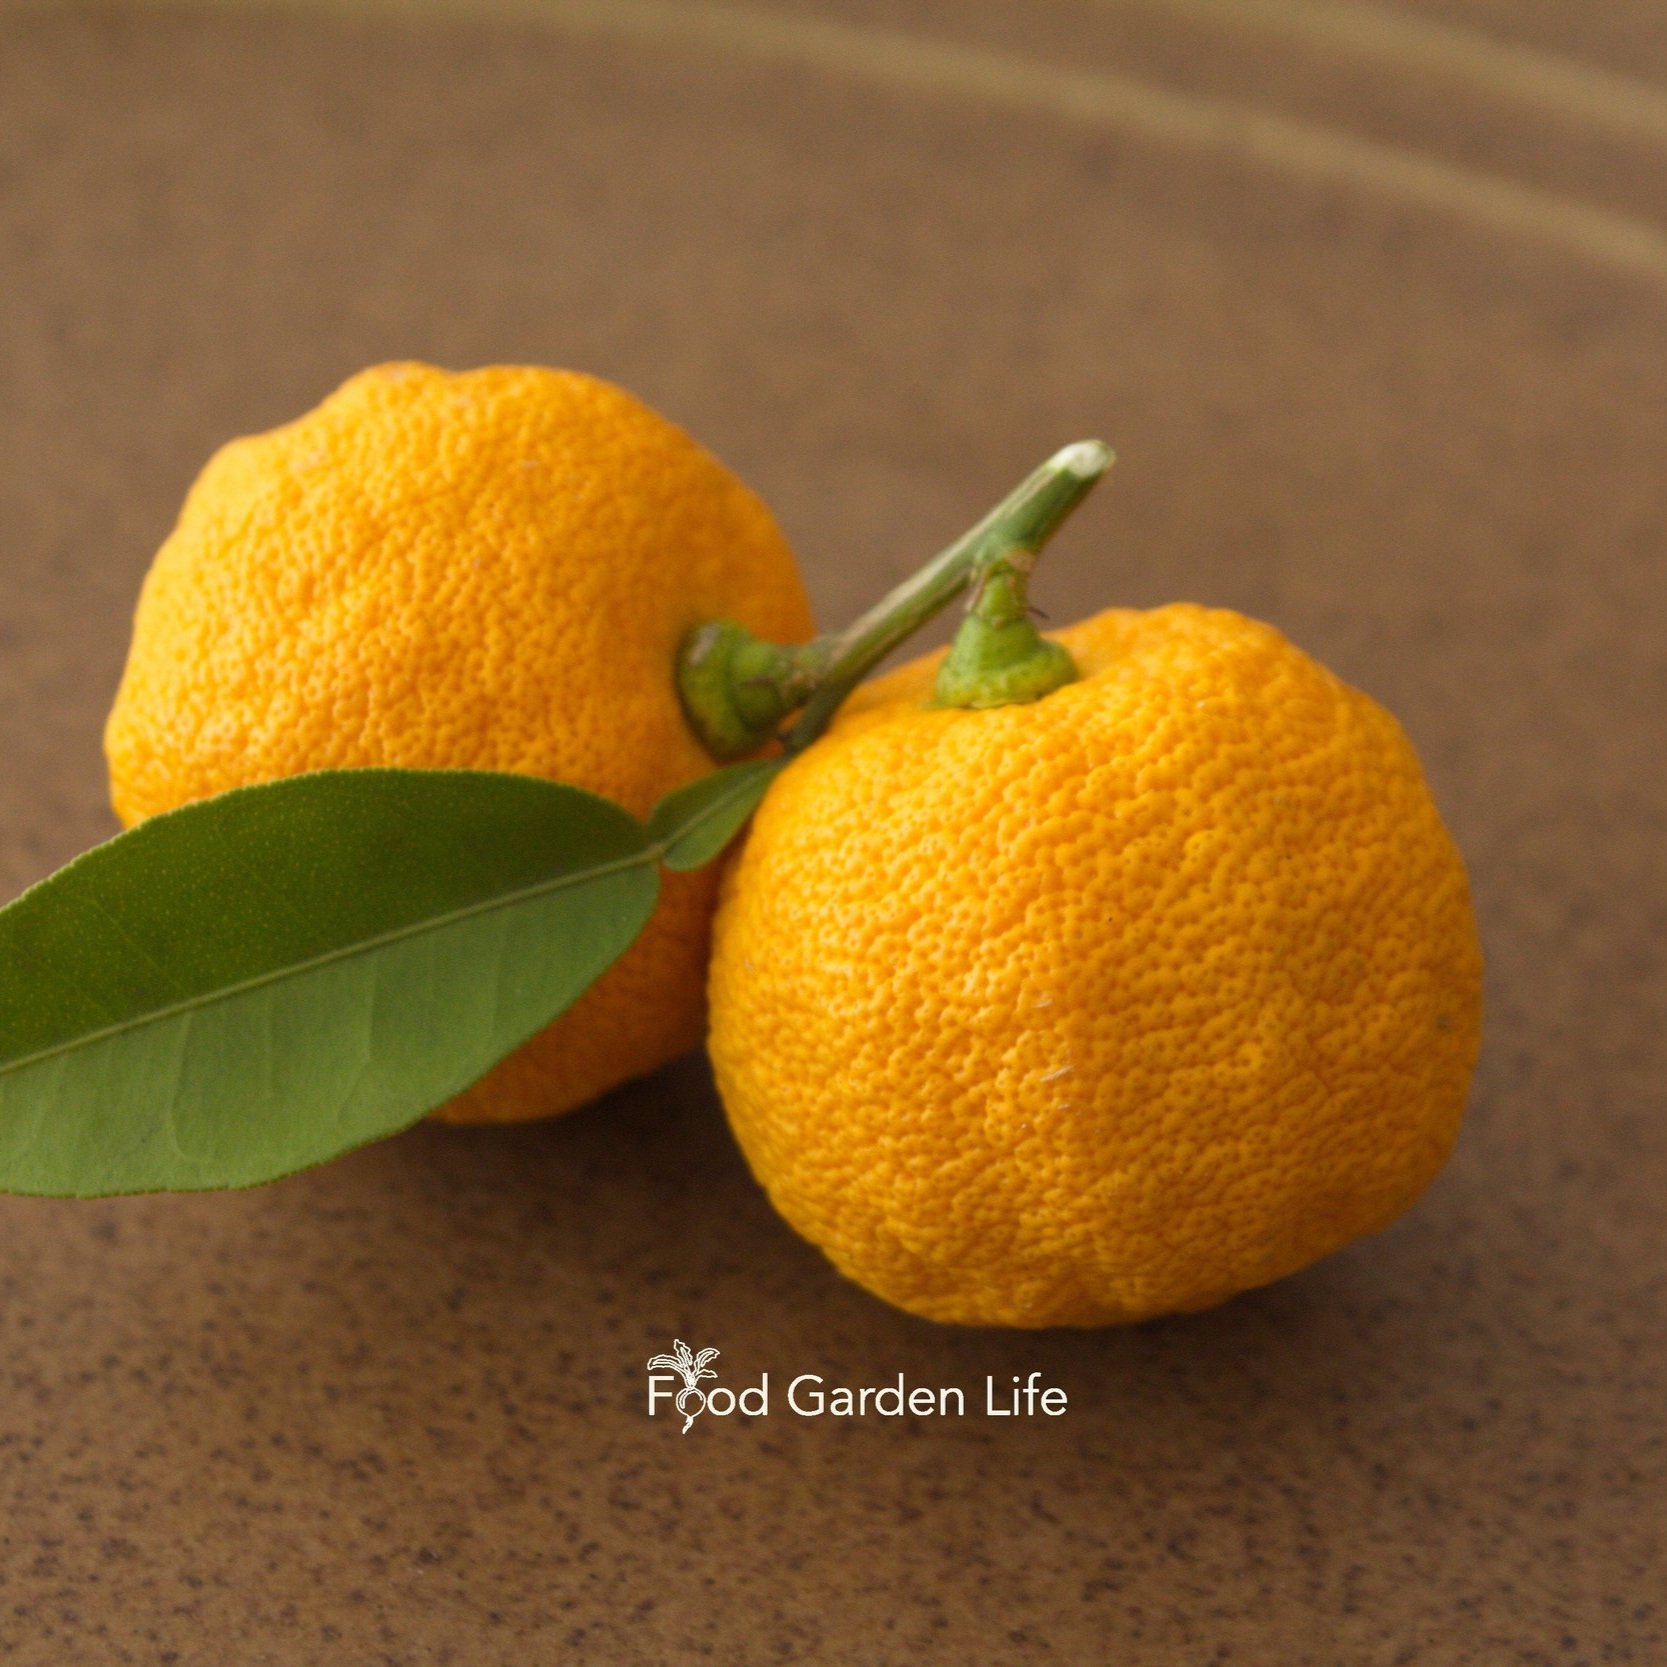 Yuzu tree, grow the citrus that can survive cold winters